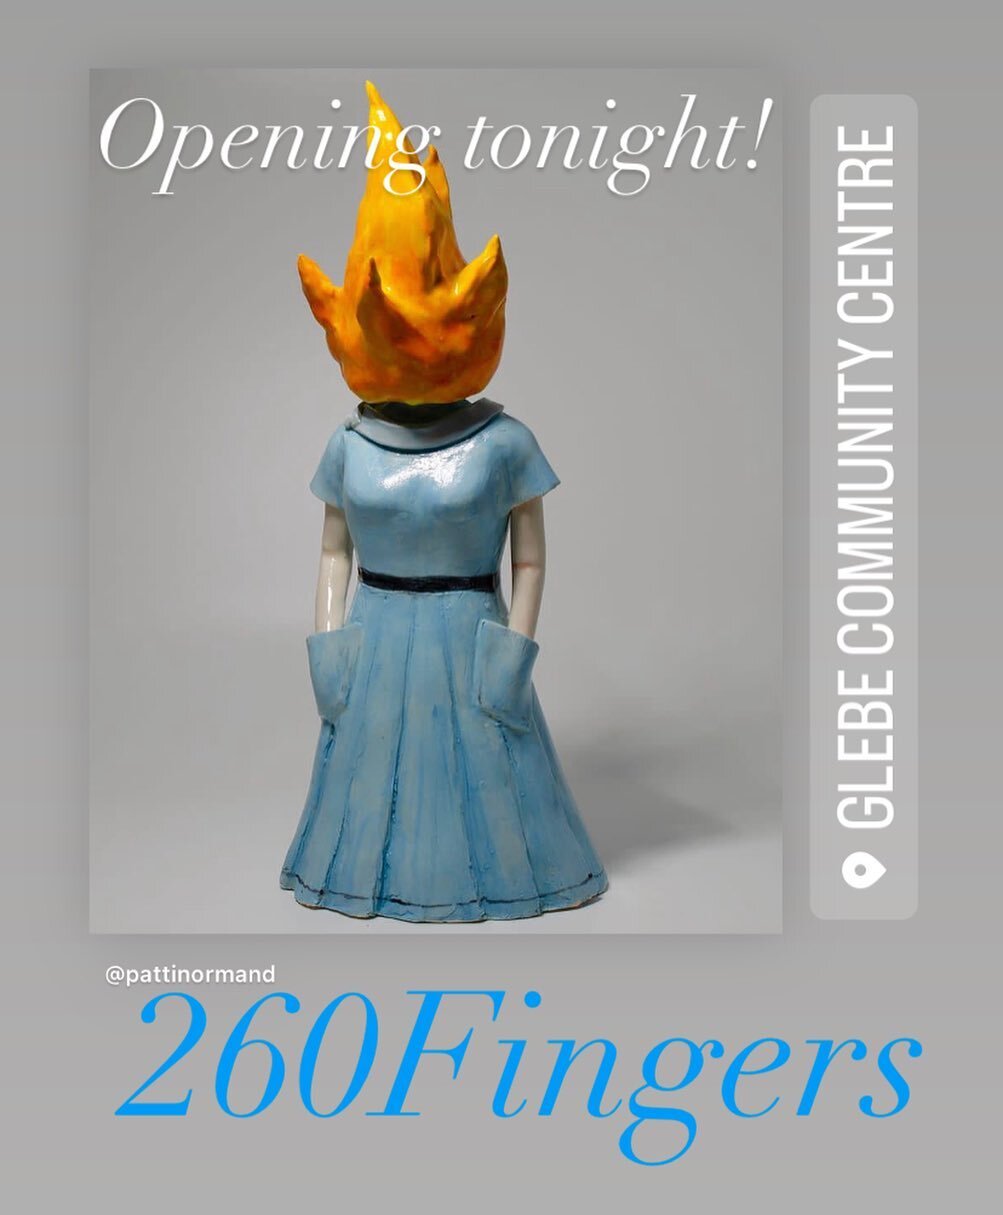 Well today&rsquo;s the day. 260Fingers invitational Show&amp;sale is opening tonight! Come and see all of the fantastic work we&rsquo;ve made, chat with us and enjoy the celebration. #260fingers #260fingers2023 #ceramicart